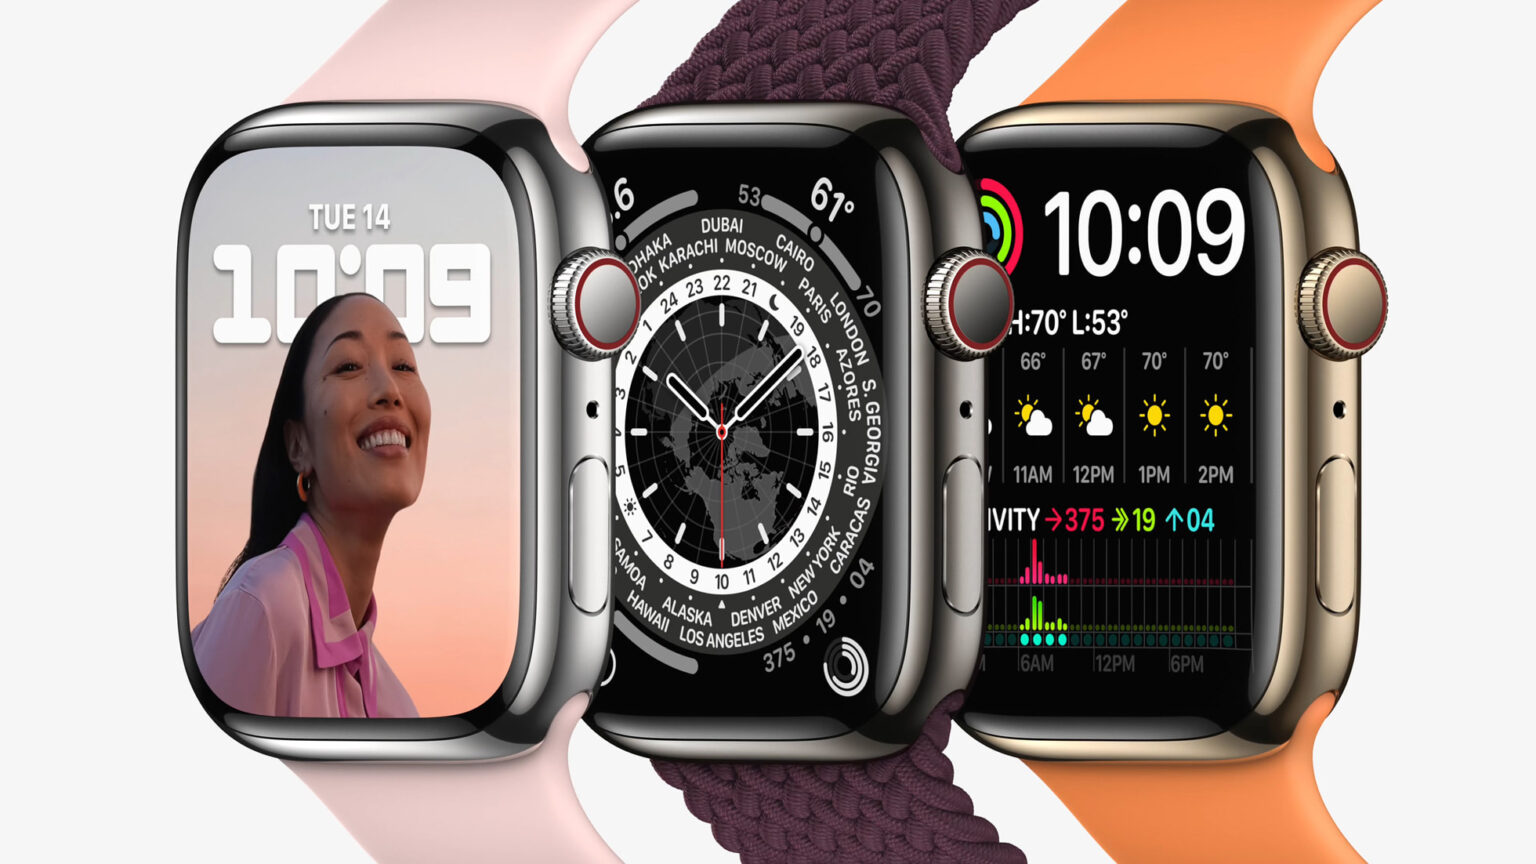 The Apple Watch Series 7 promises to be a revolutionary piece of wearable tech. Check out some of its exciting new innovations and features.